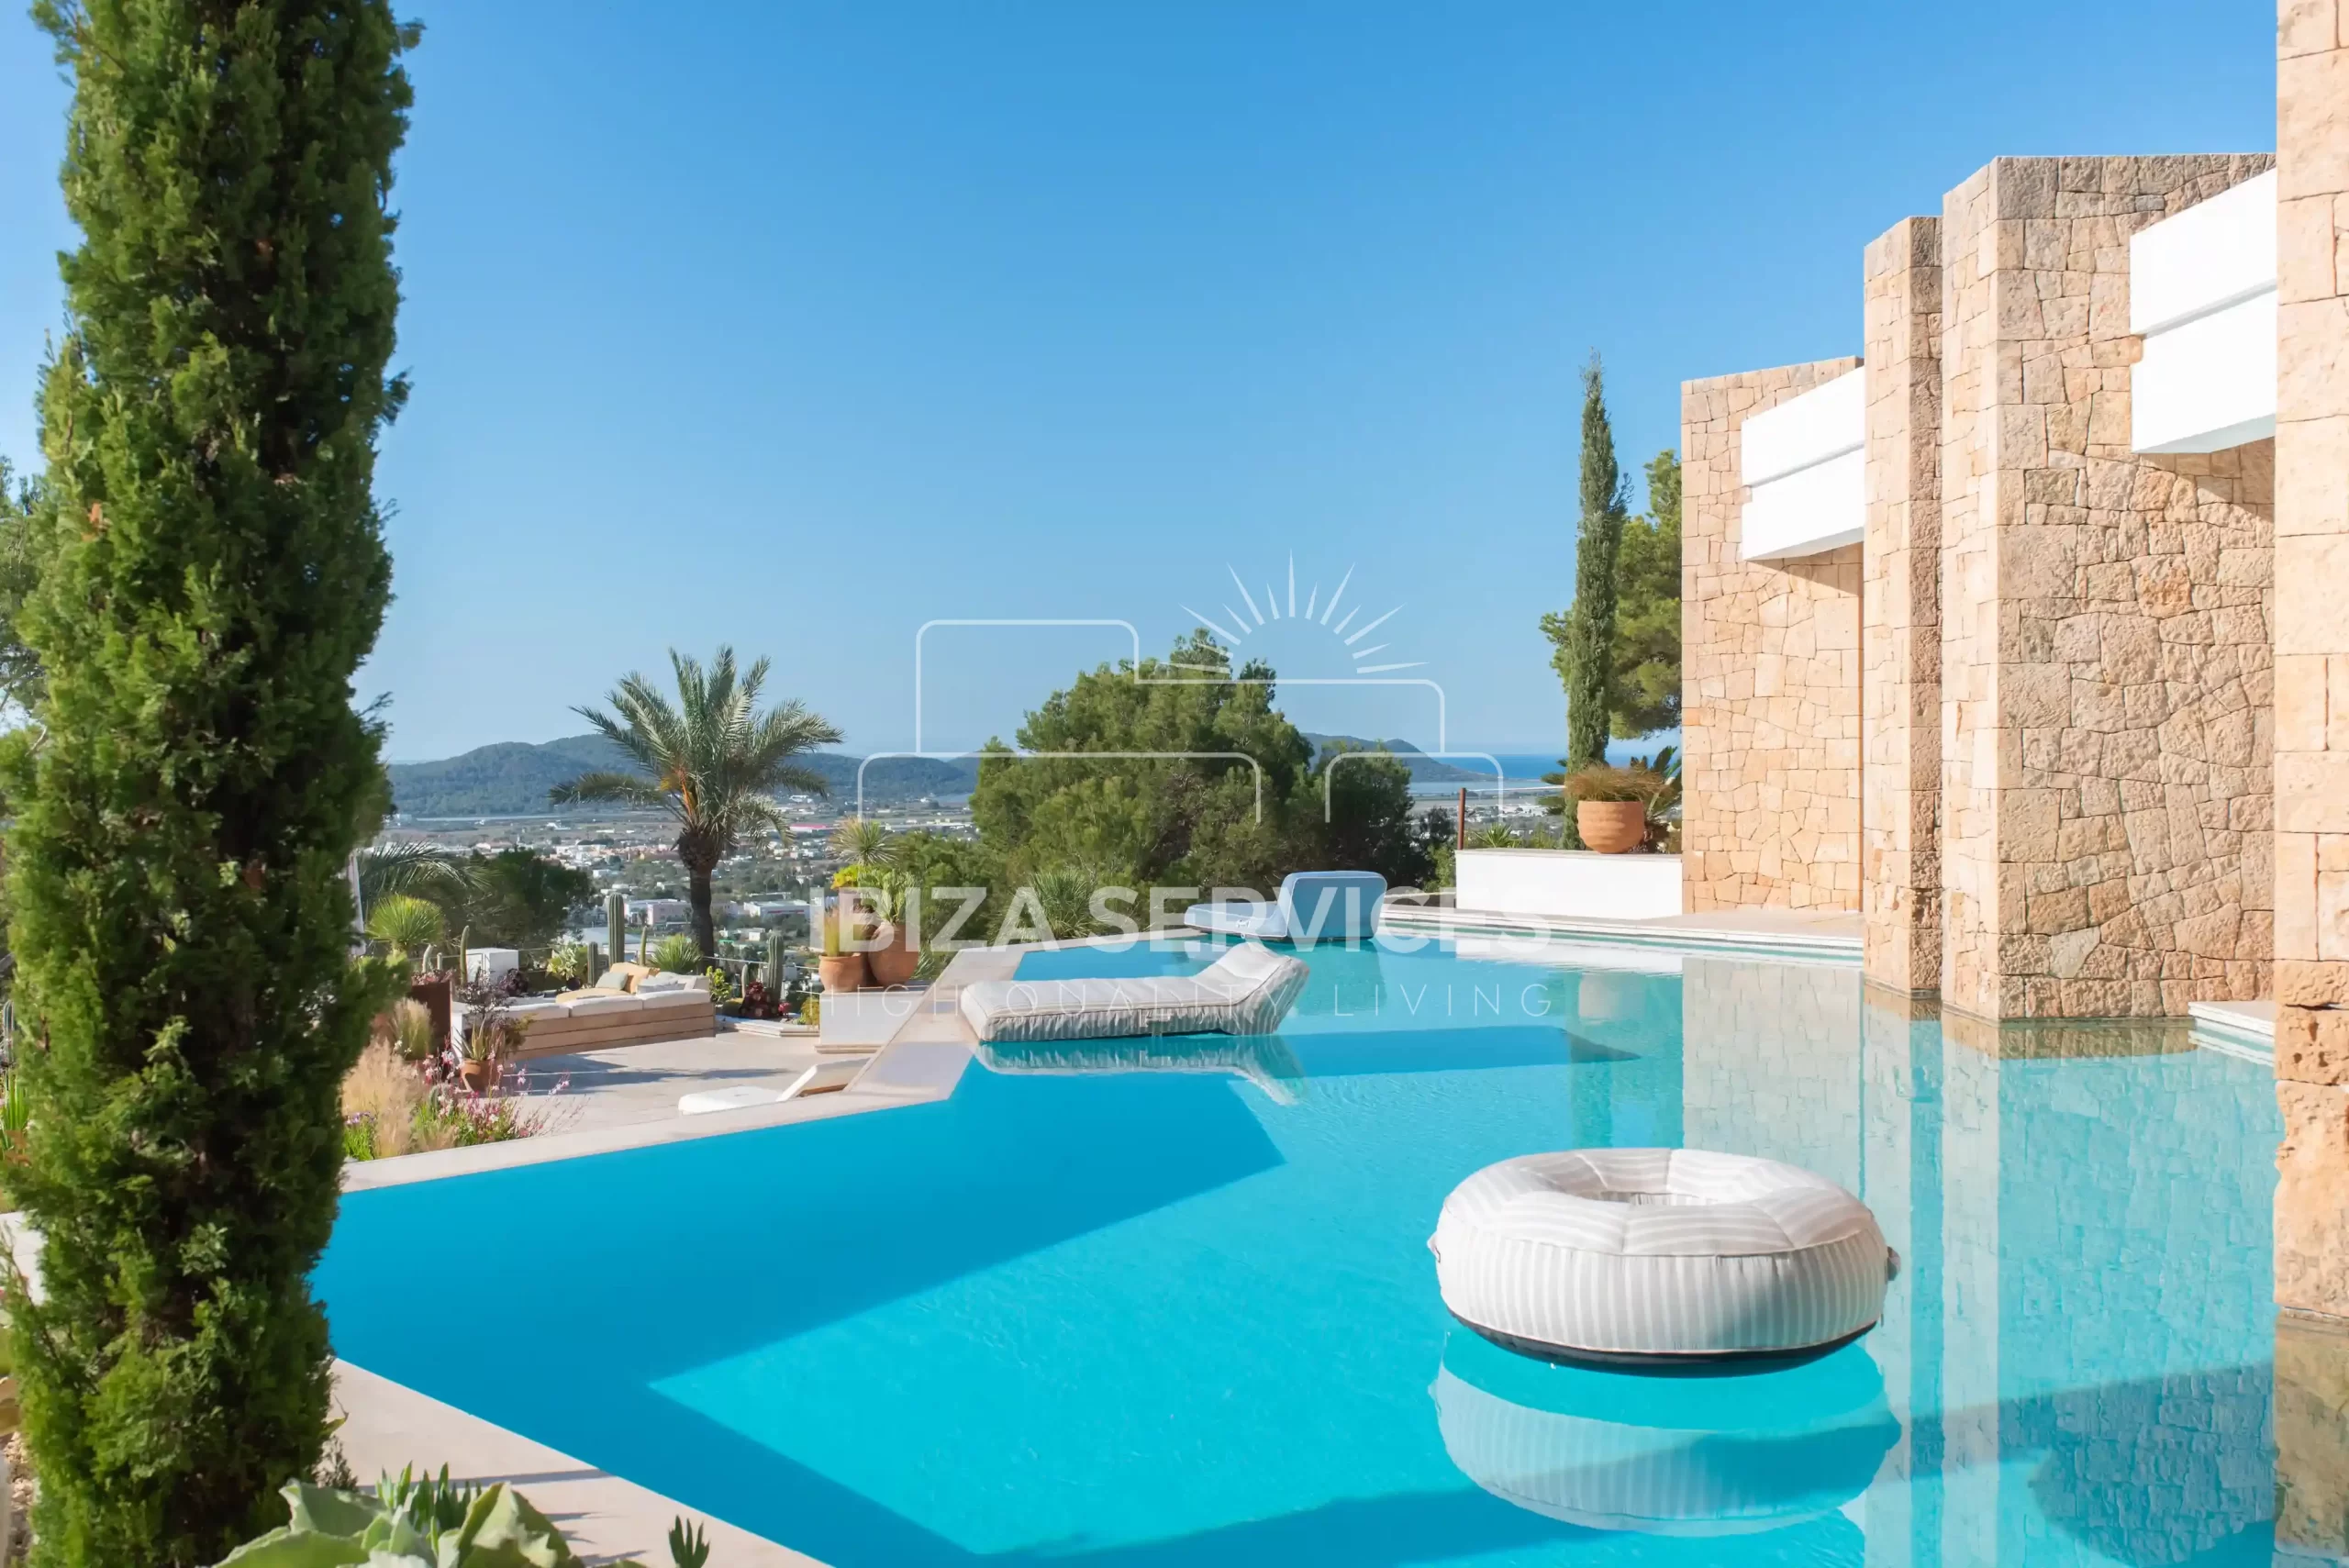 Can Sakhara Rental Villa: Luxury and Privacy with Sea Views, Close to Everything in Ibiza